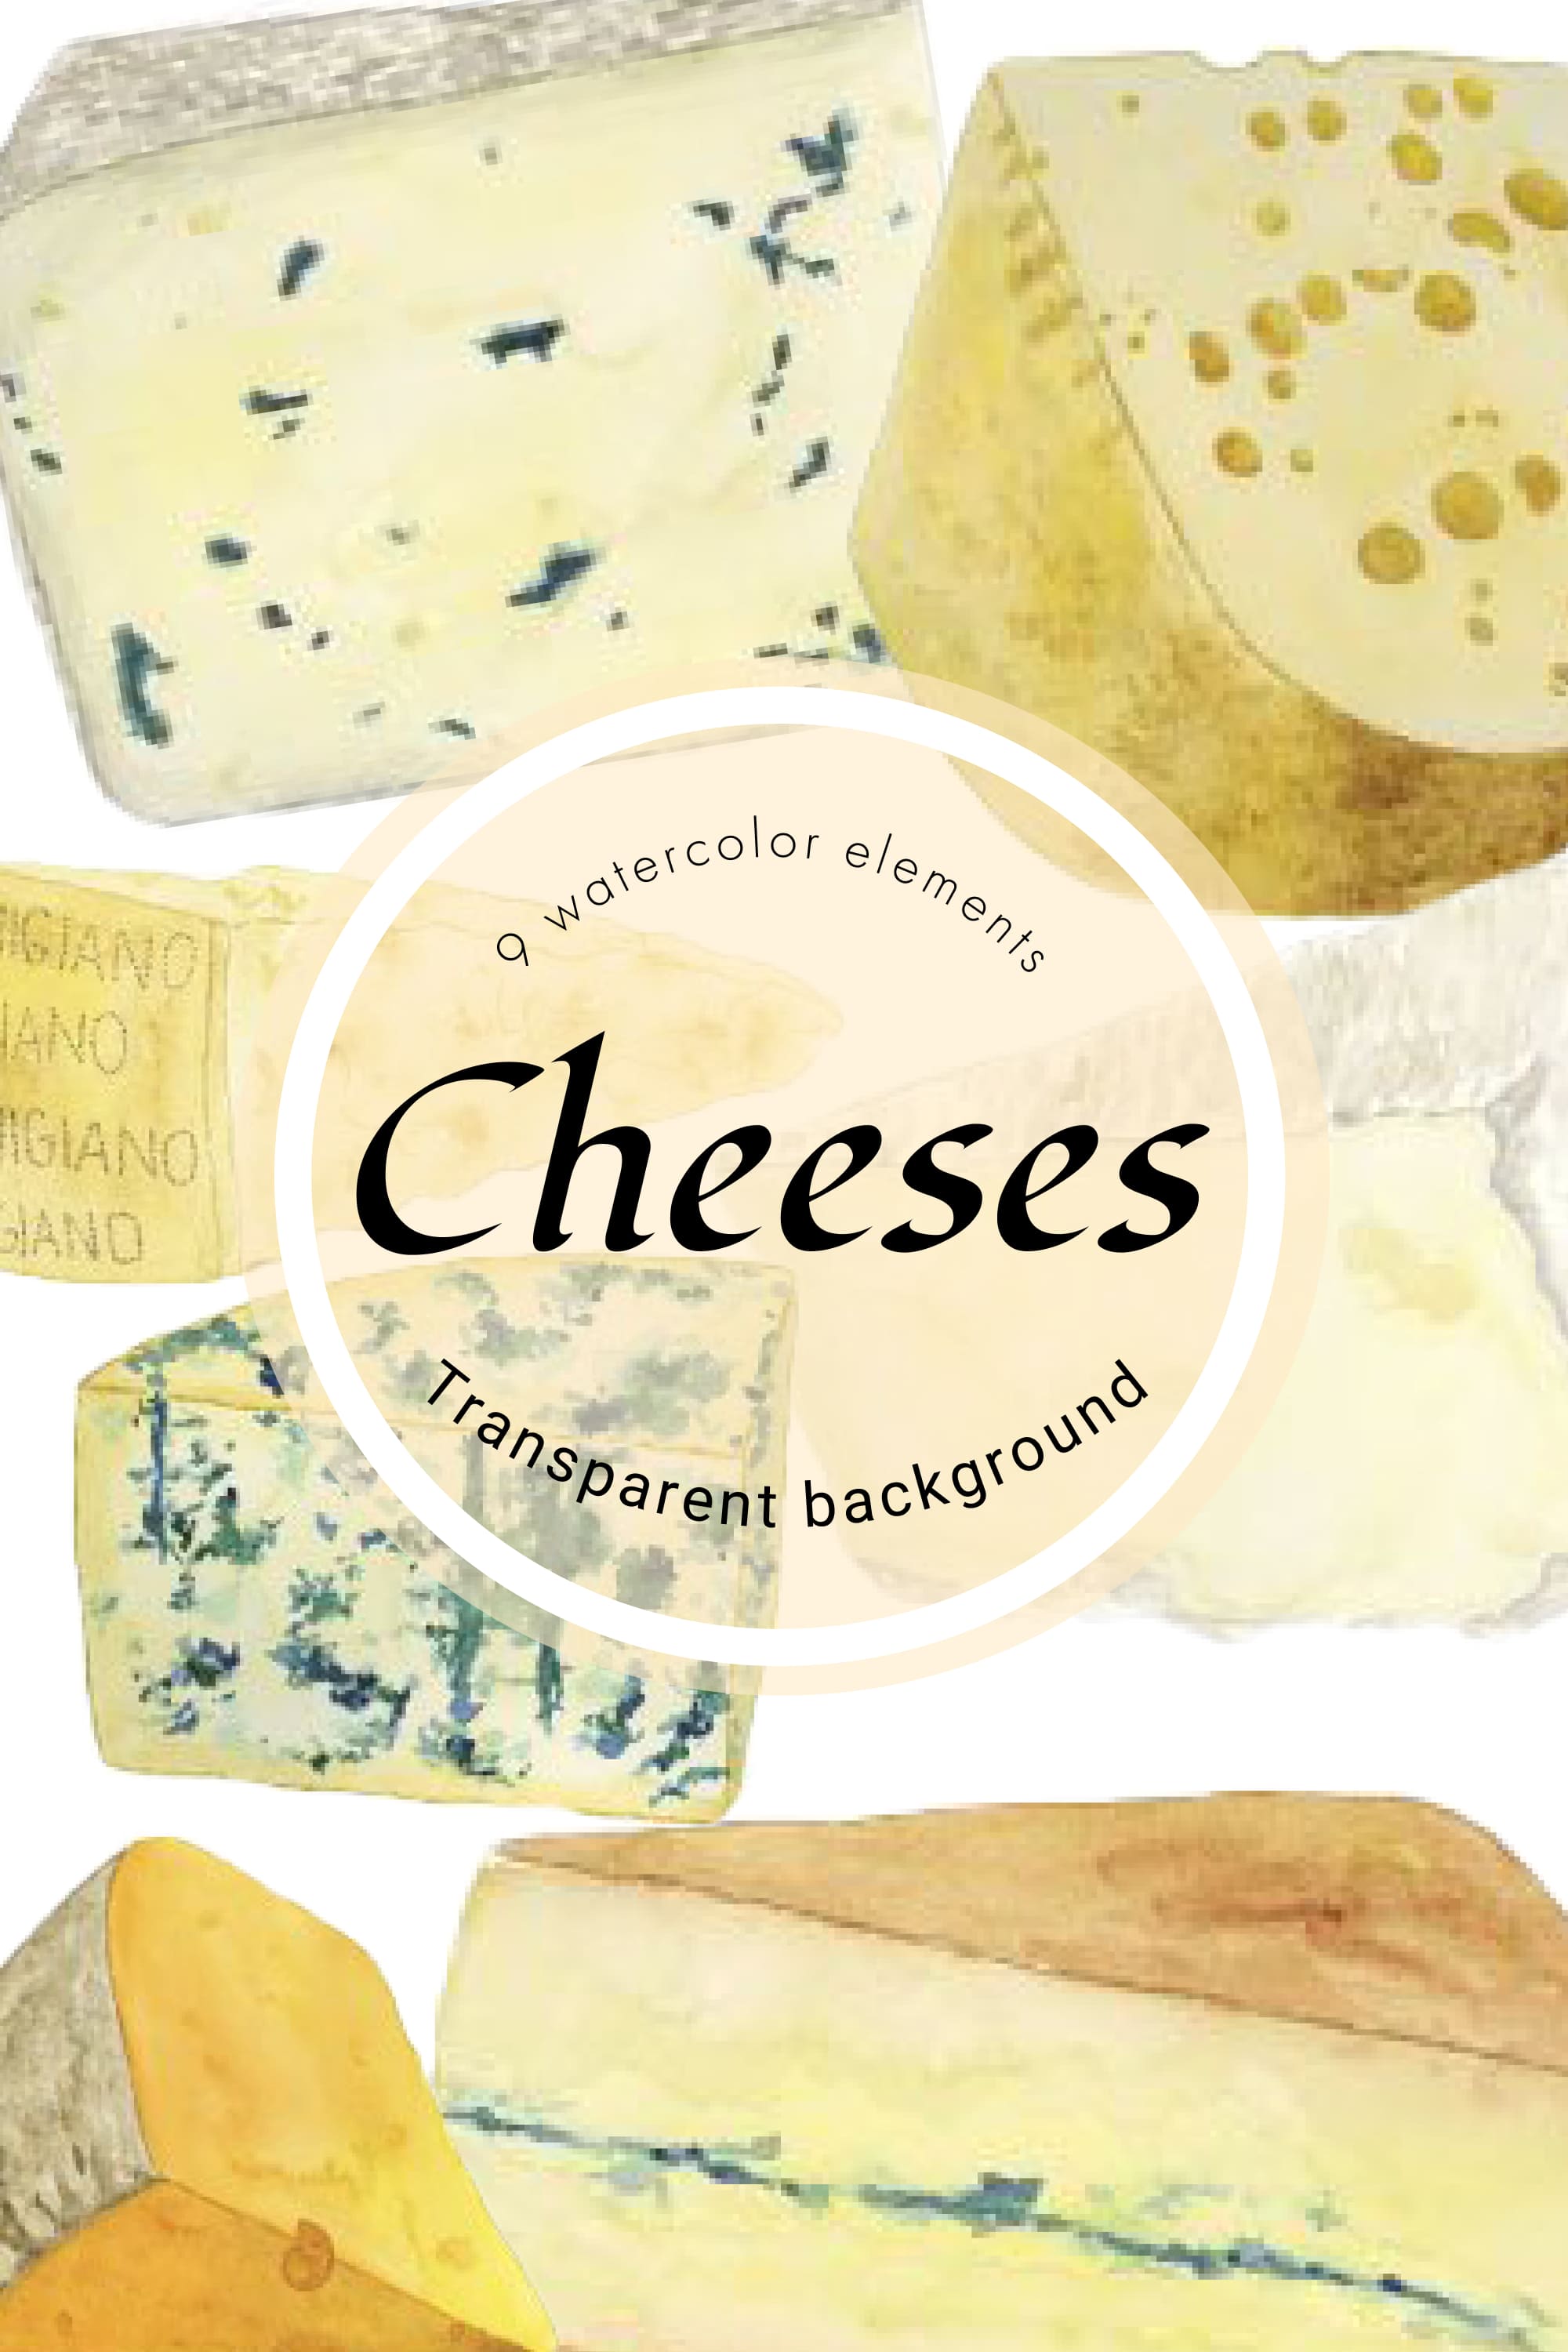 Set of colorful watercolor images of french cheeses.